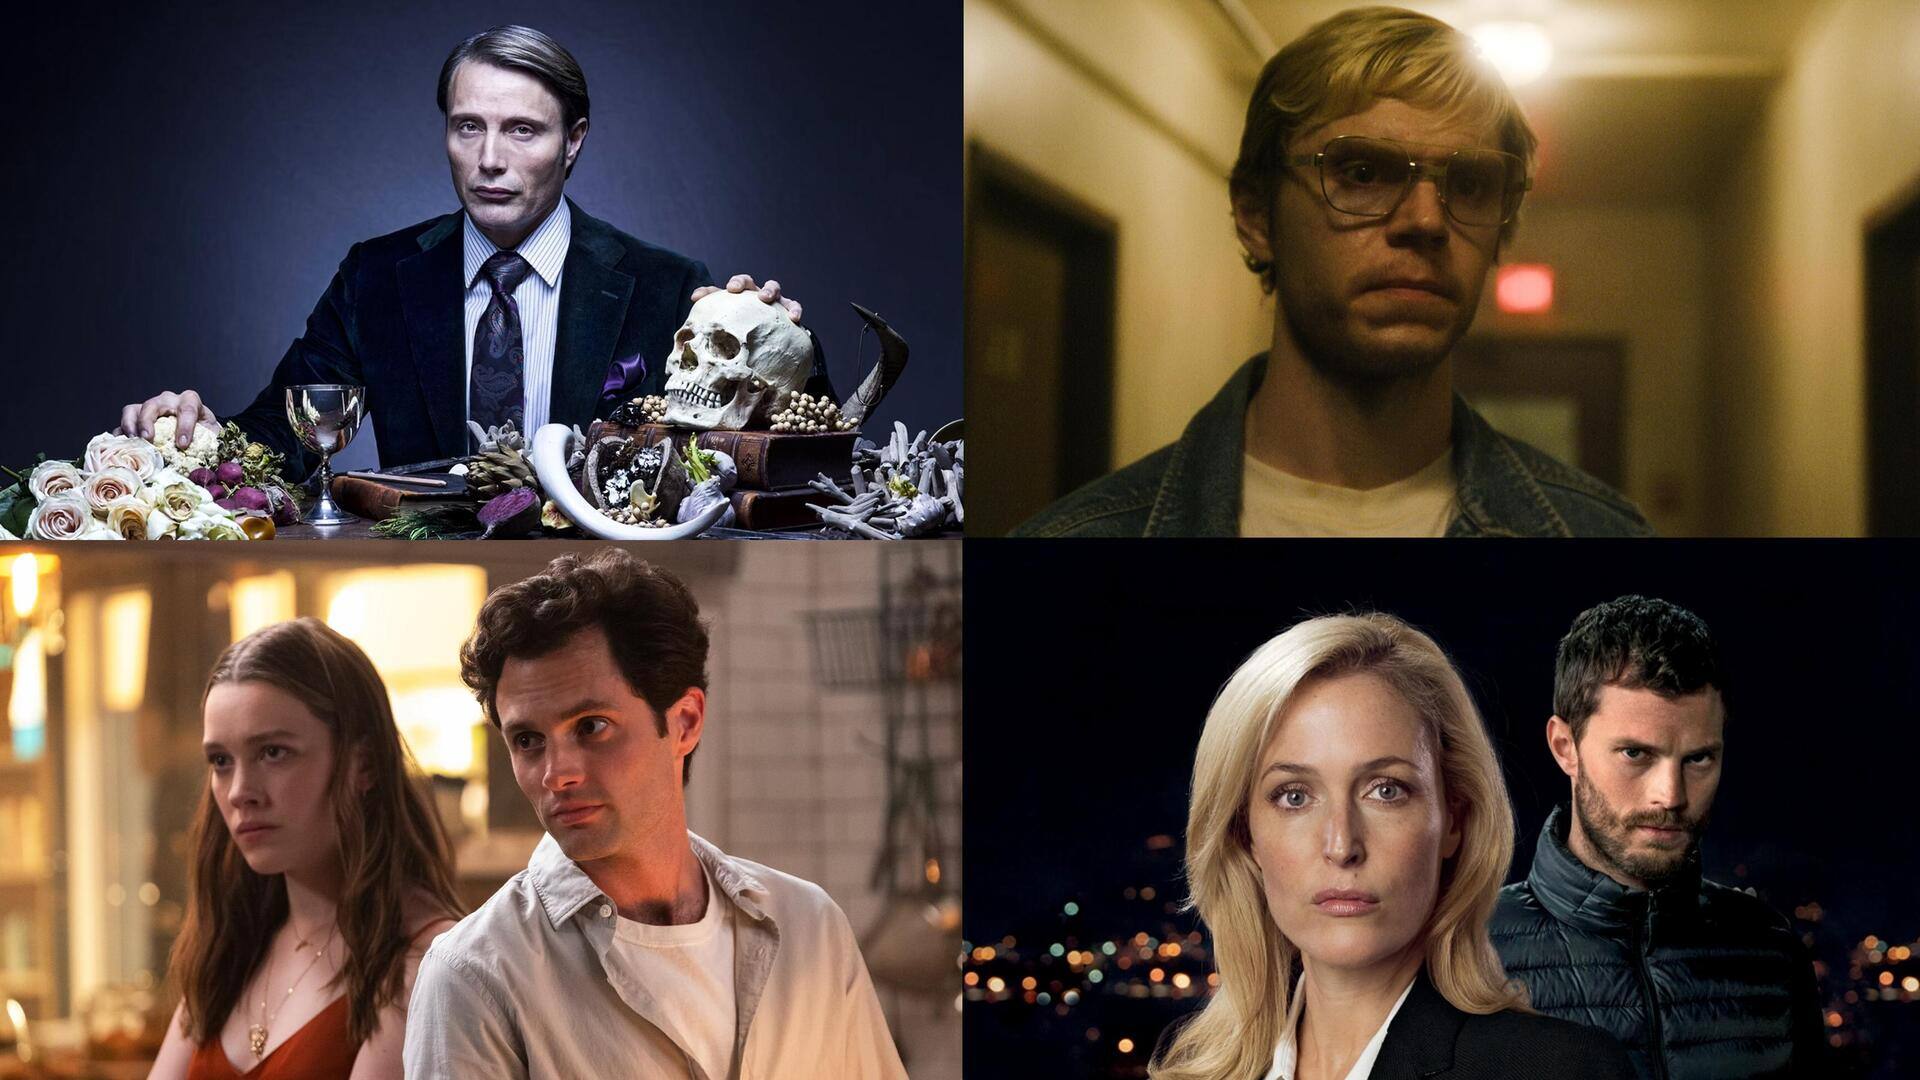 'Mindhunter' to 'Jeffrey Dahmer': Must-watch shows on serial killers 